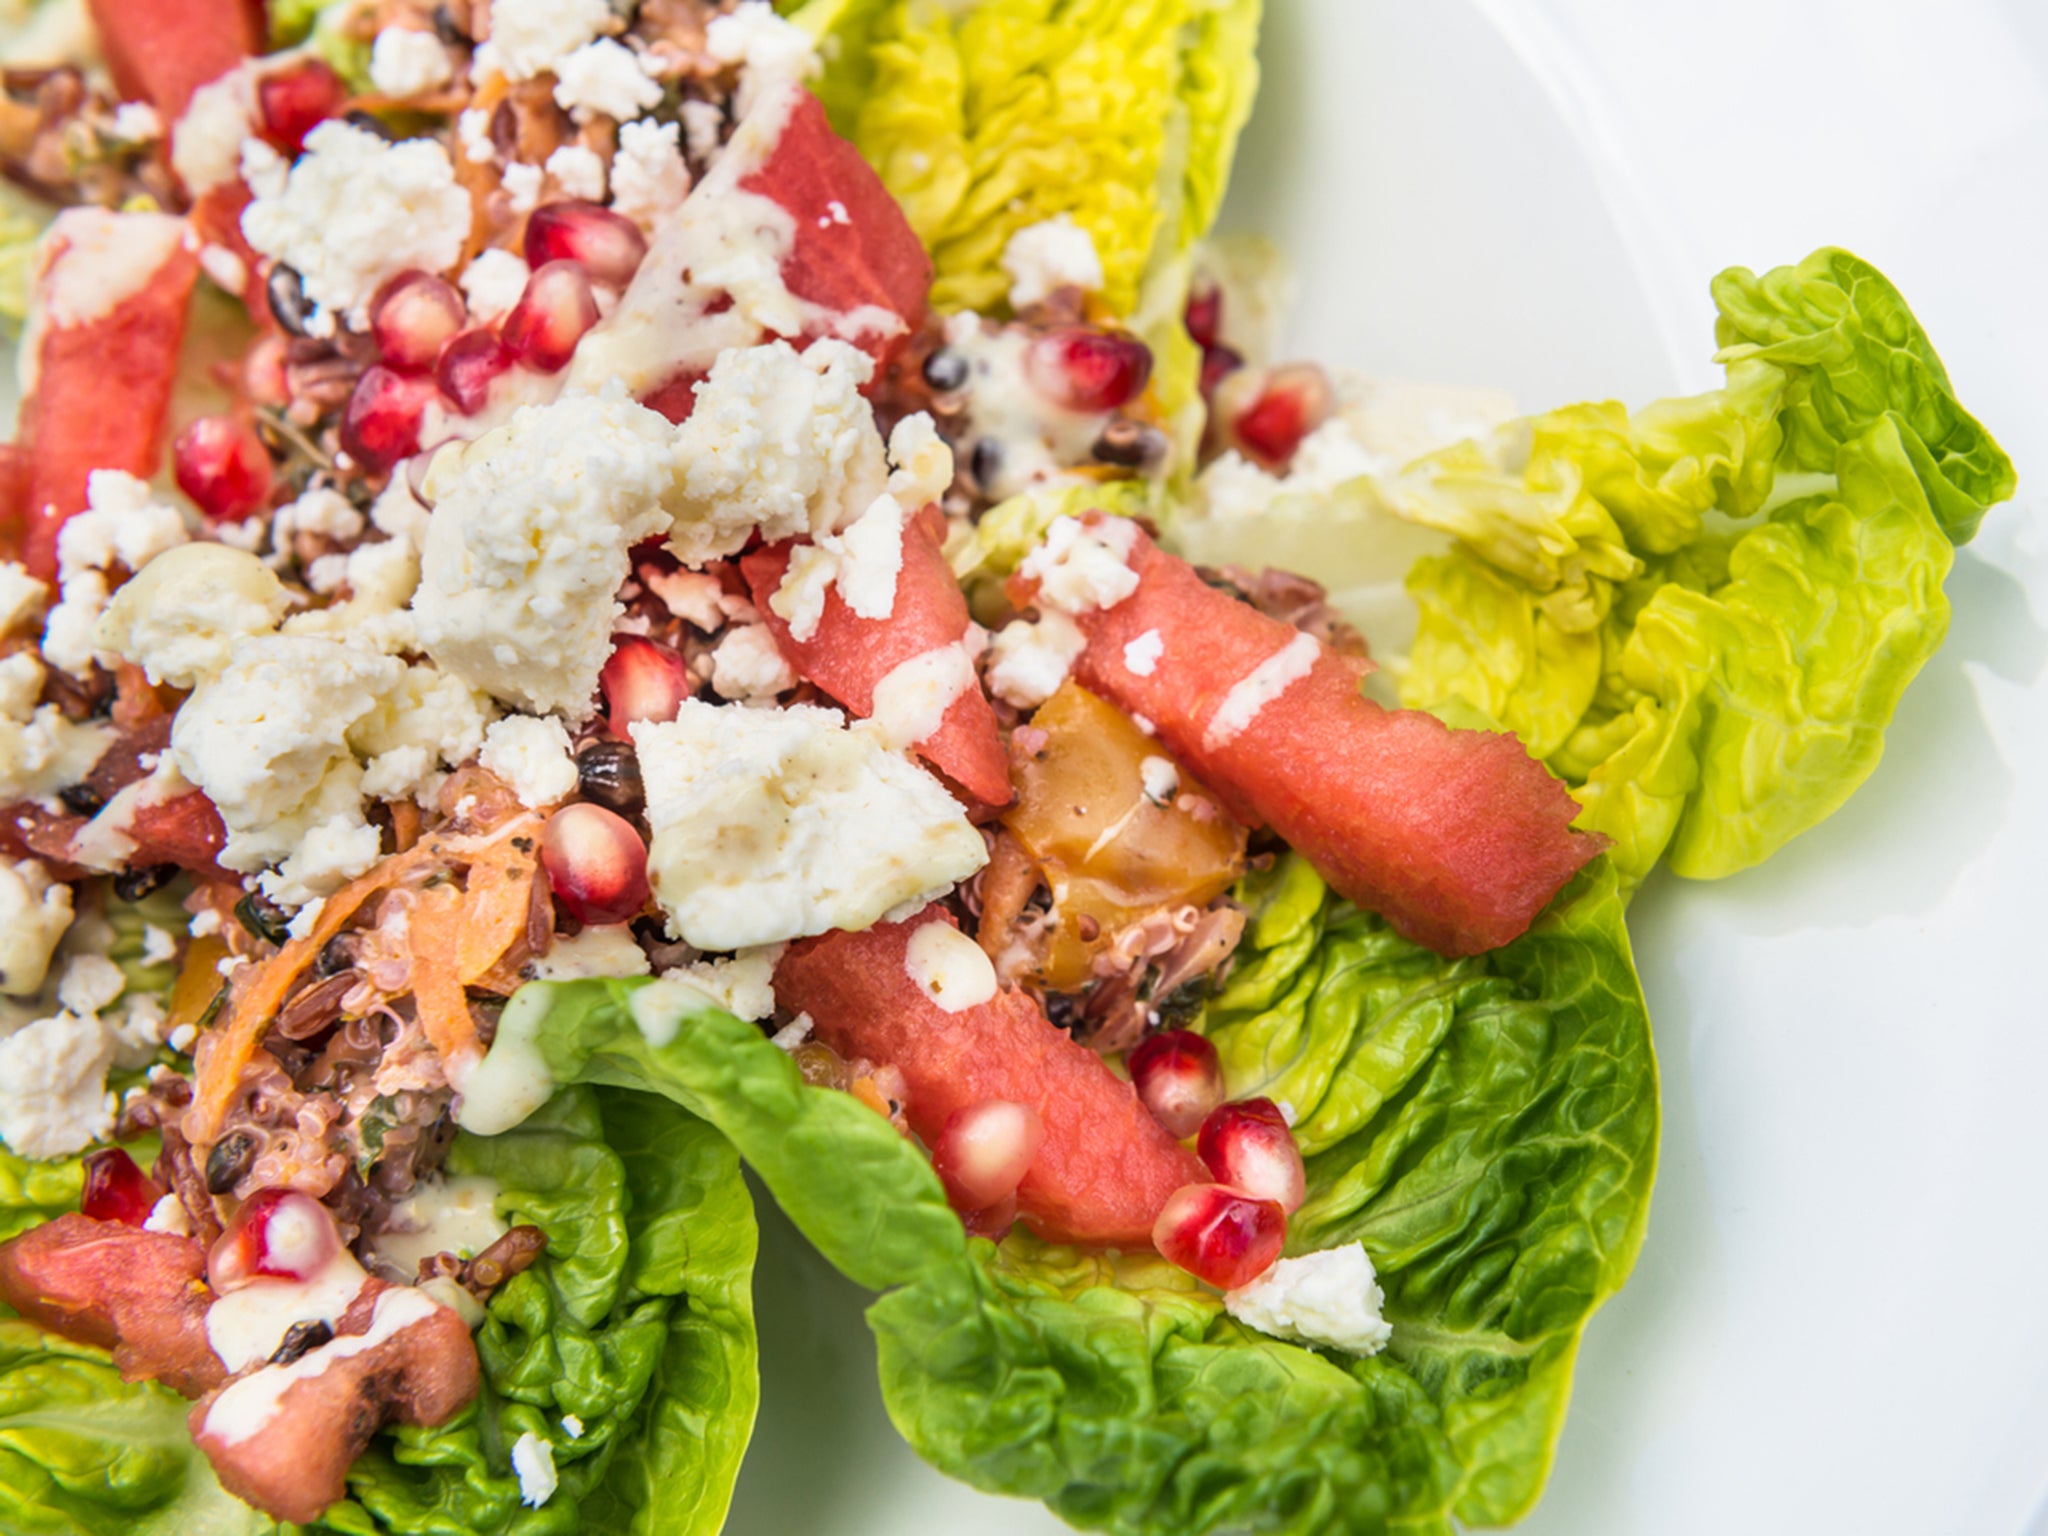 This refreshing and nutritious twist on a classic watermelon and feta salad is the perfect summer dish